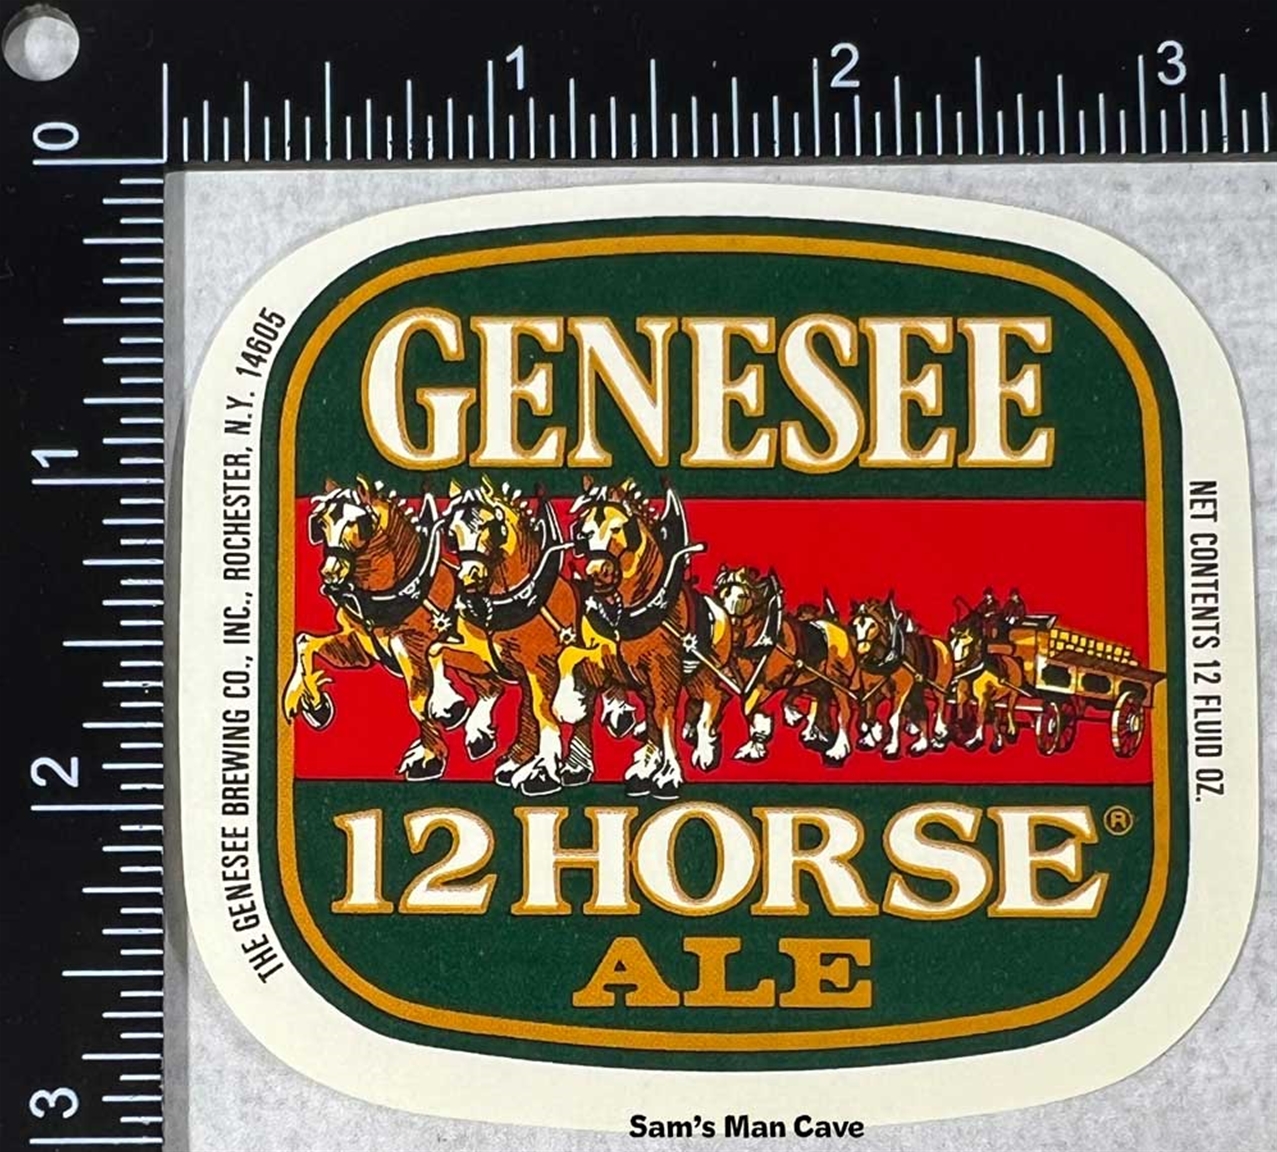 GENESEE BEER 12 Horse Ale Dundee nos STICKER decal craft beer brewery brewing